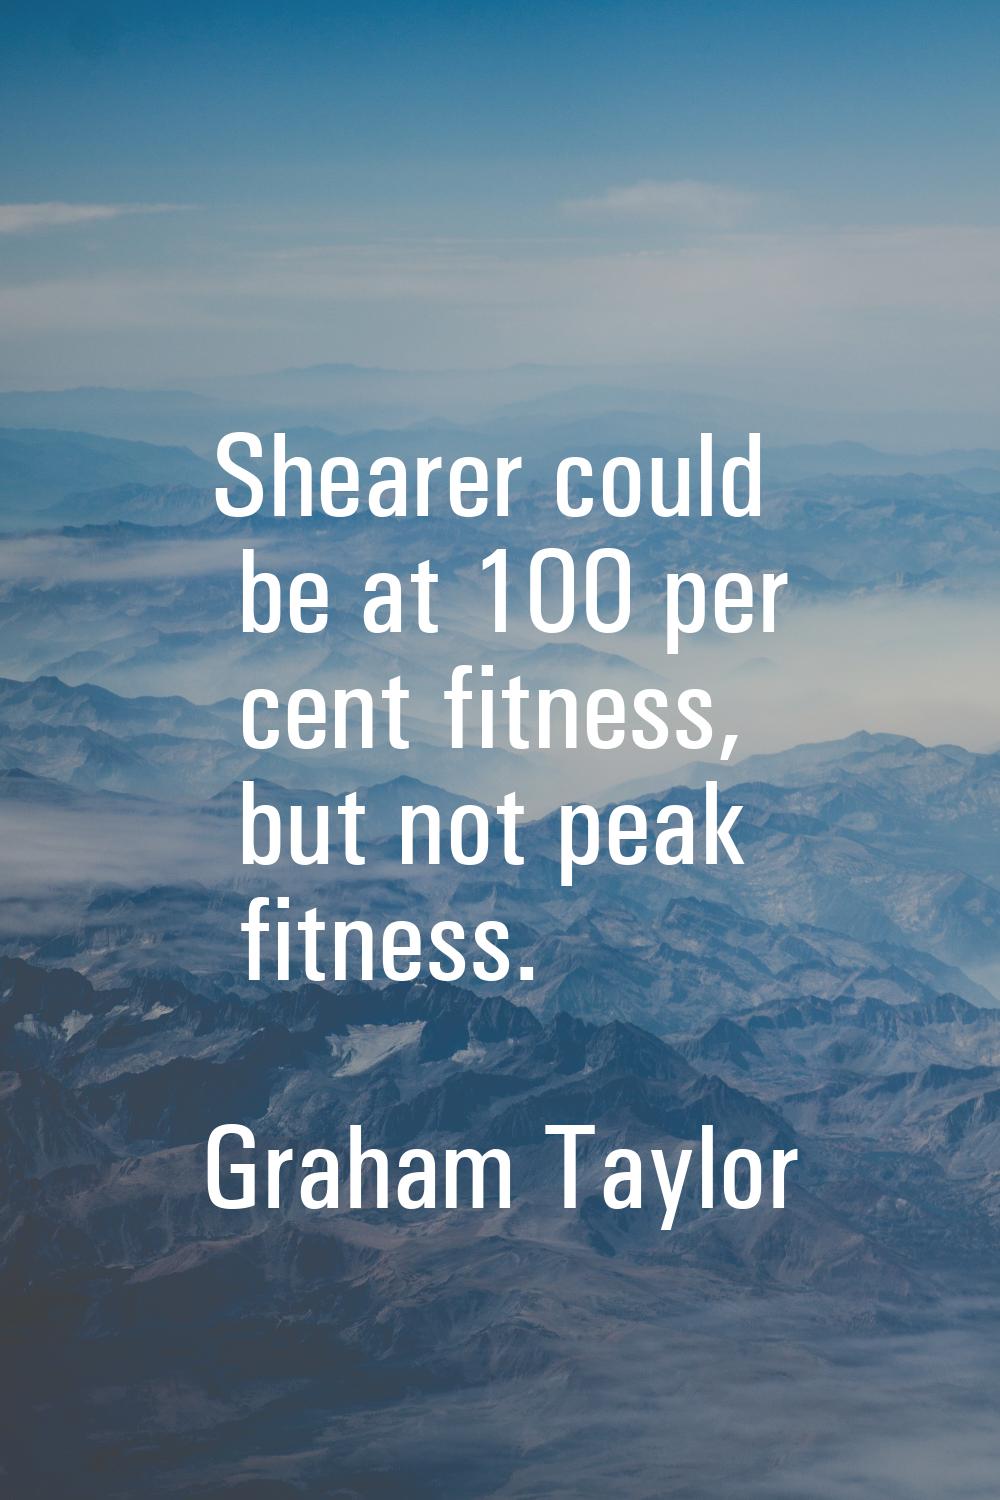 Shearer could be at 100 per cent fitness, but not peak fitness.